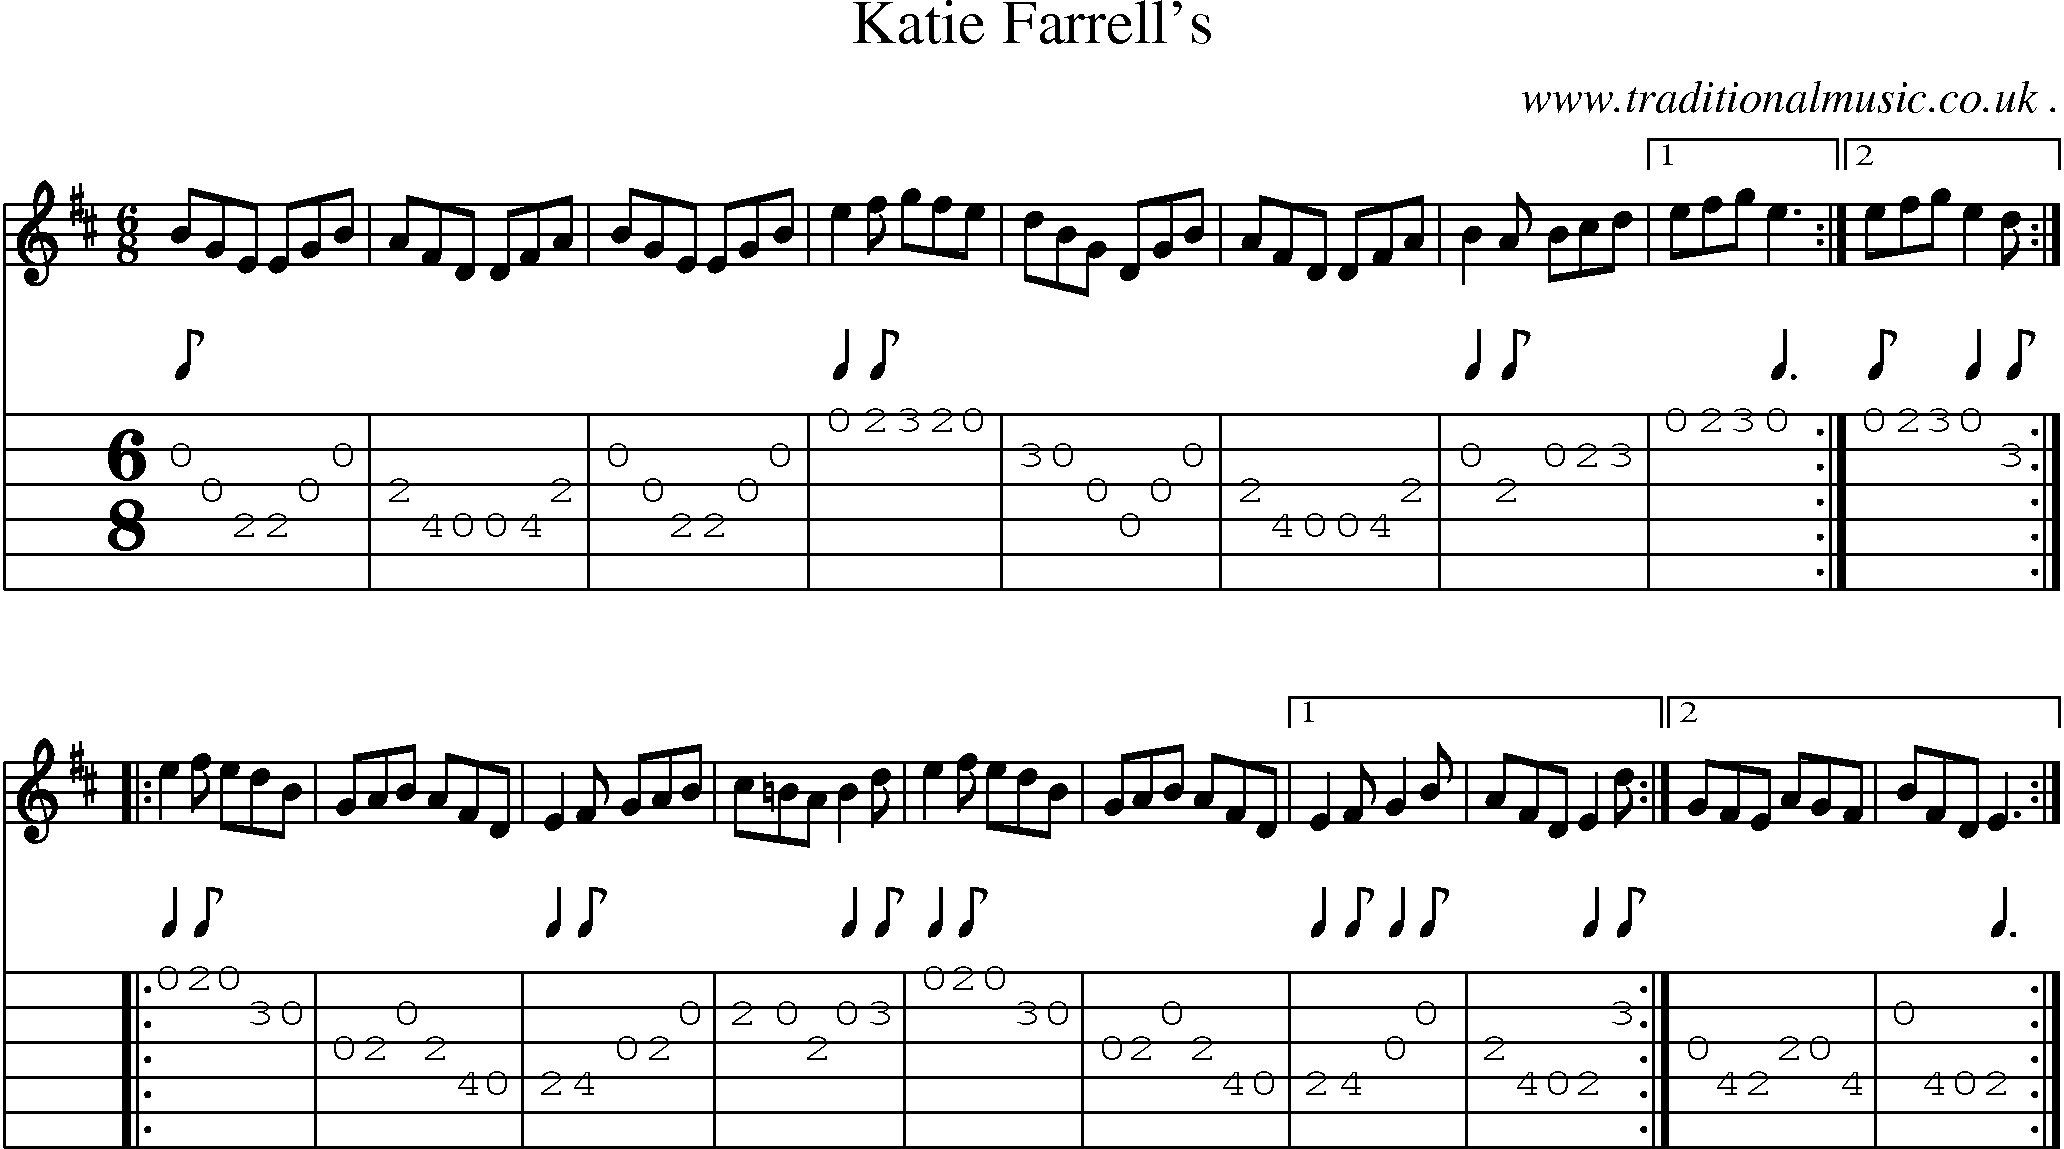 Sheet-Music and Guitar Tabs for Katie Farrells